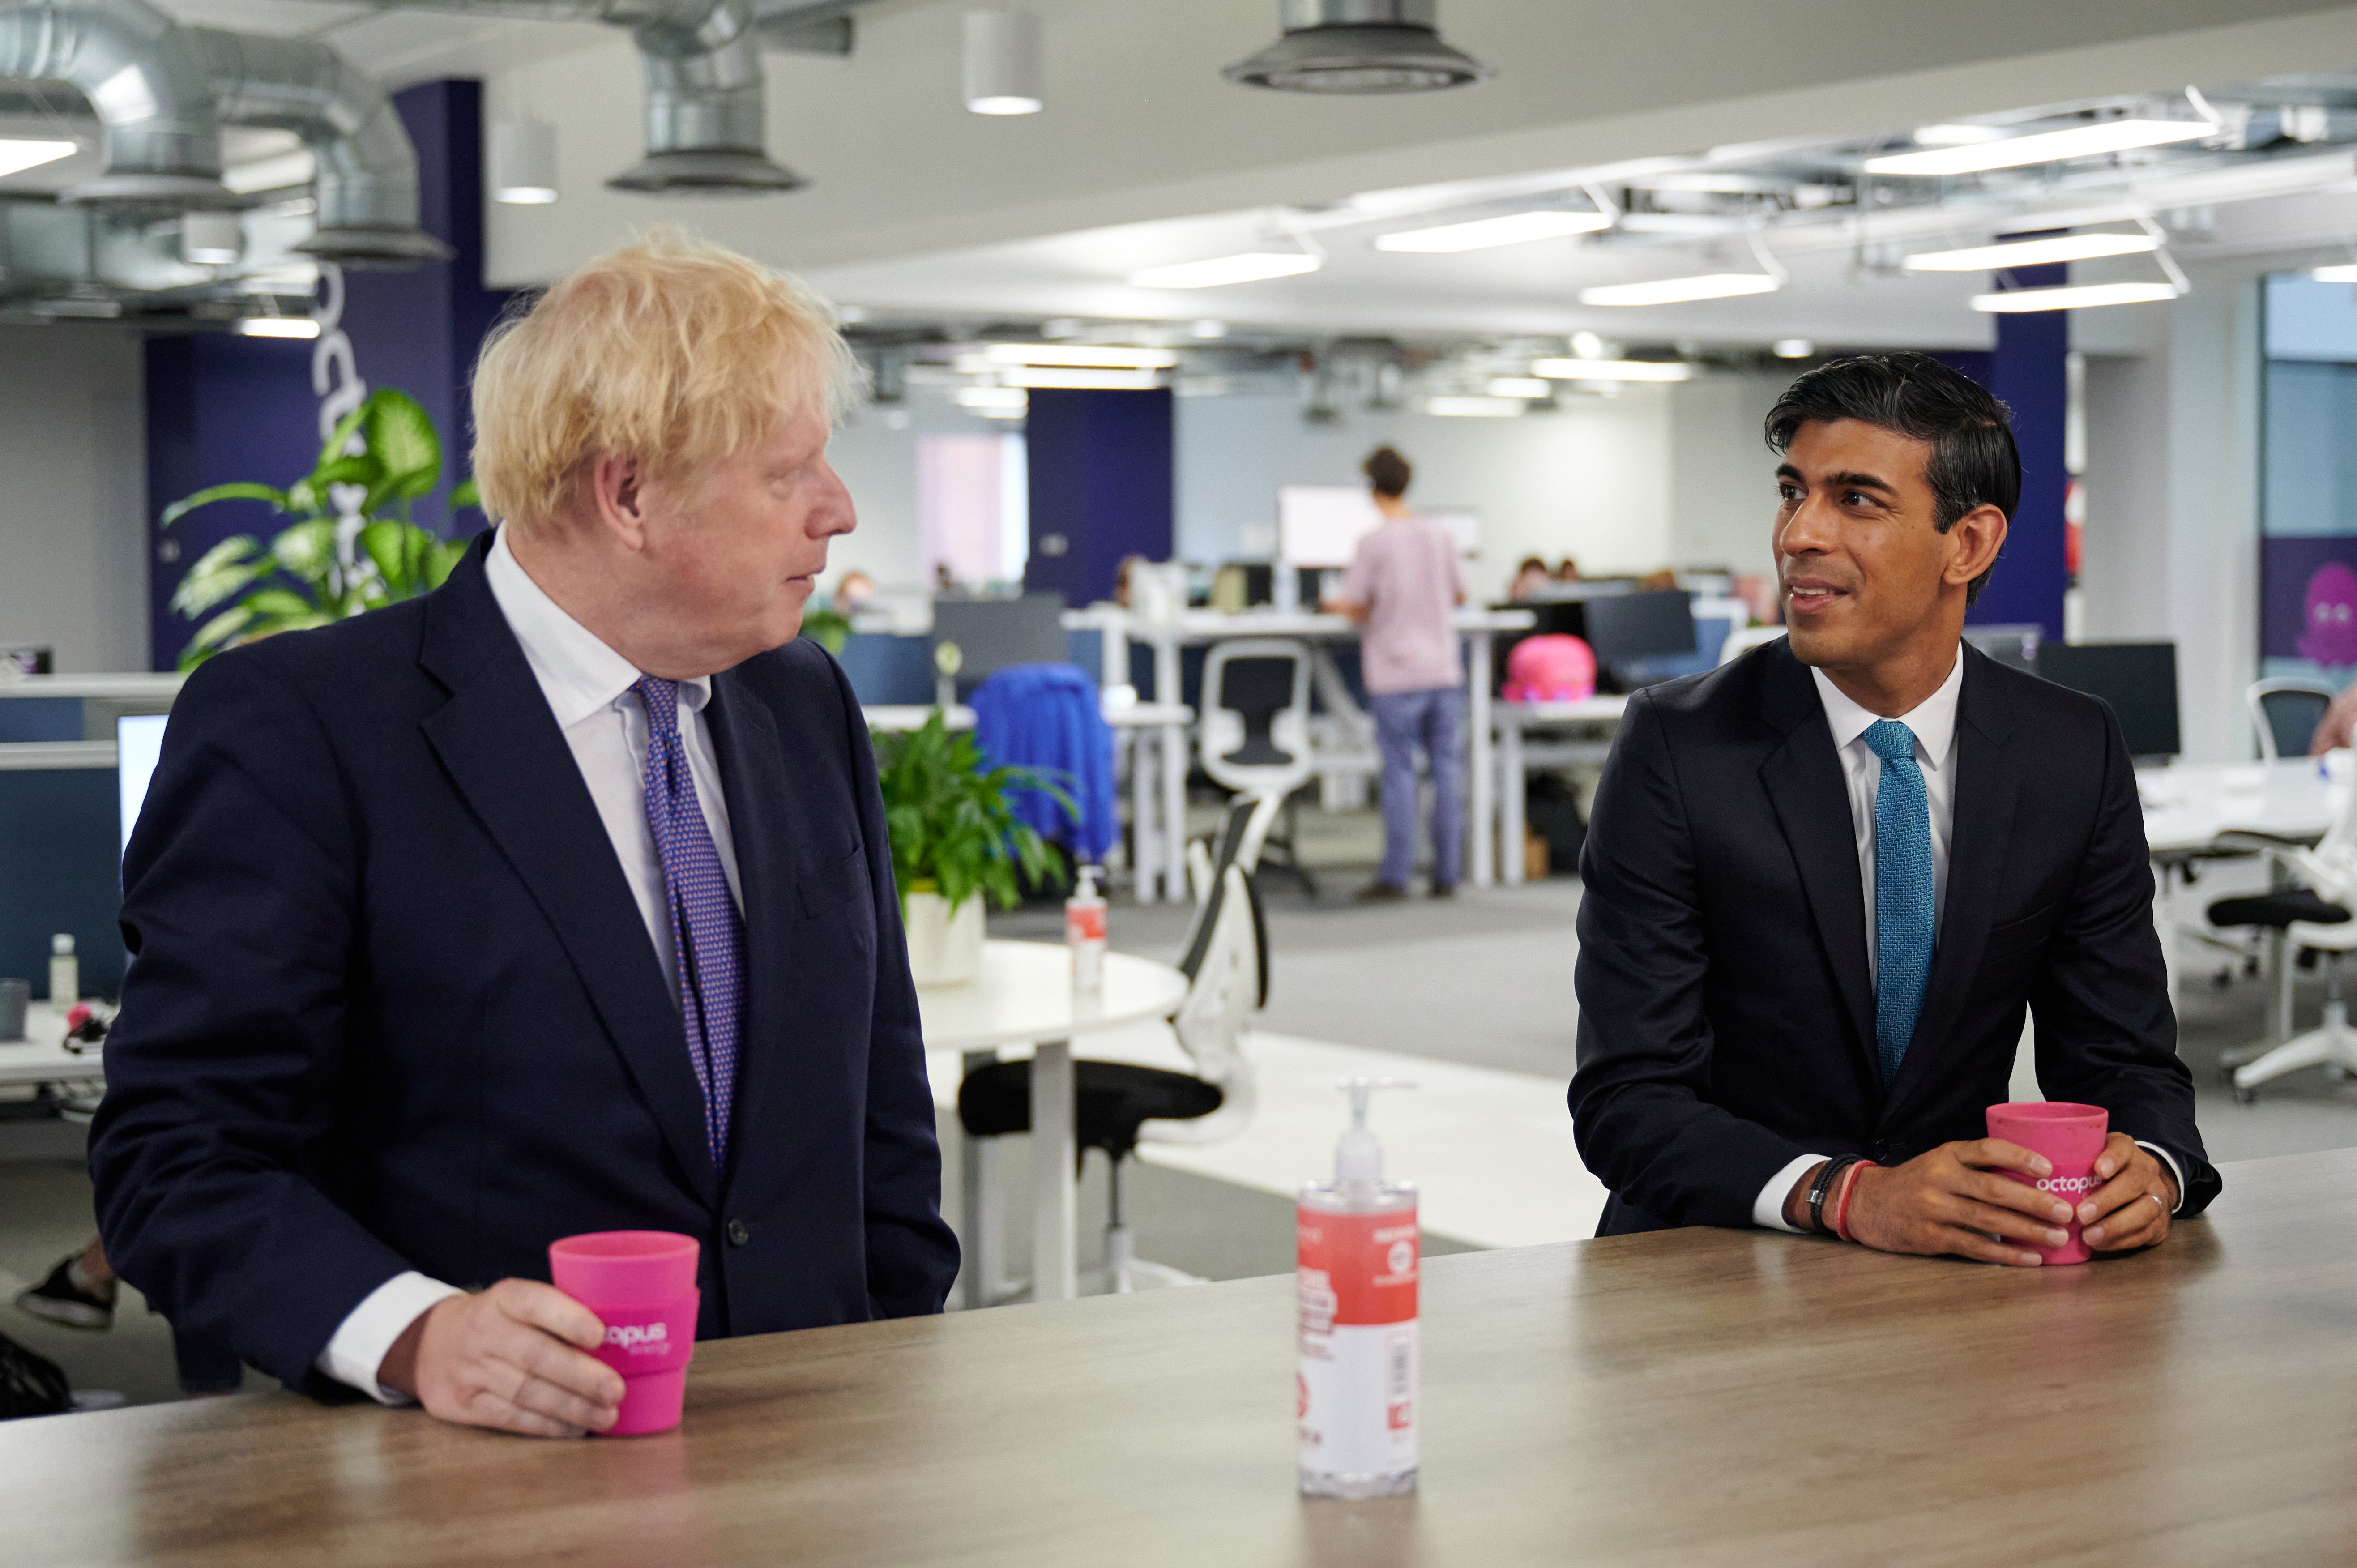 Boris Johnson and Rishi Sunak at odds over release of Covid-related material